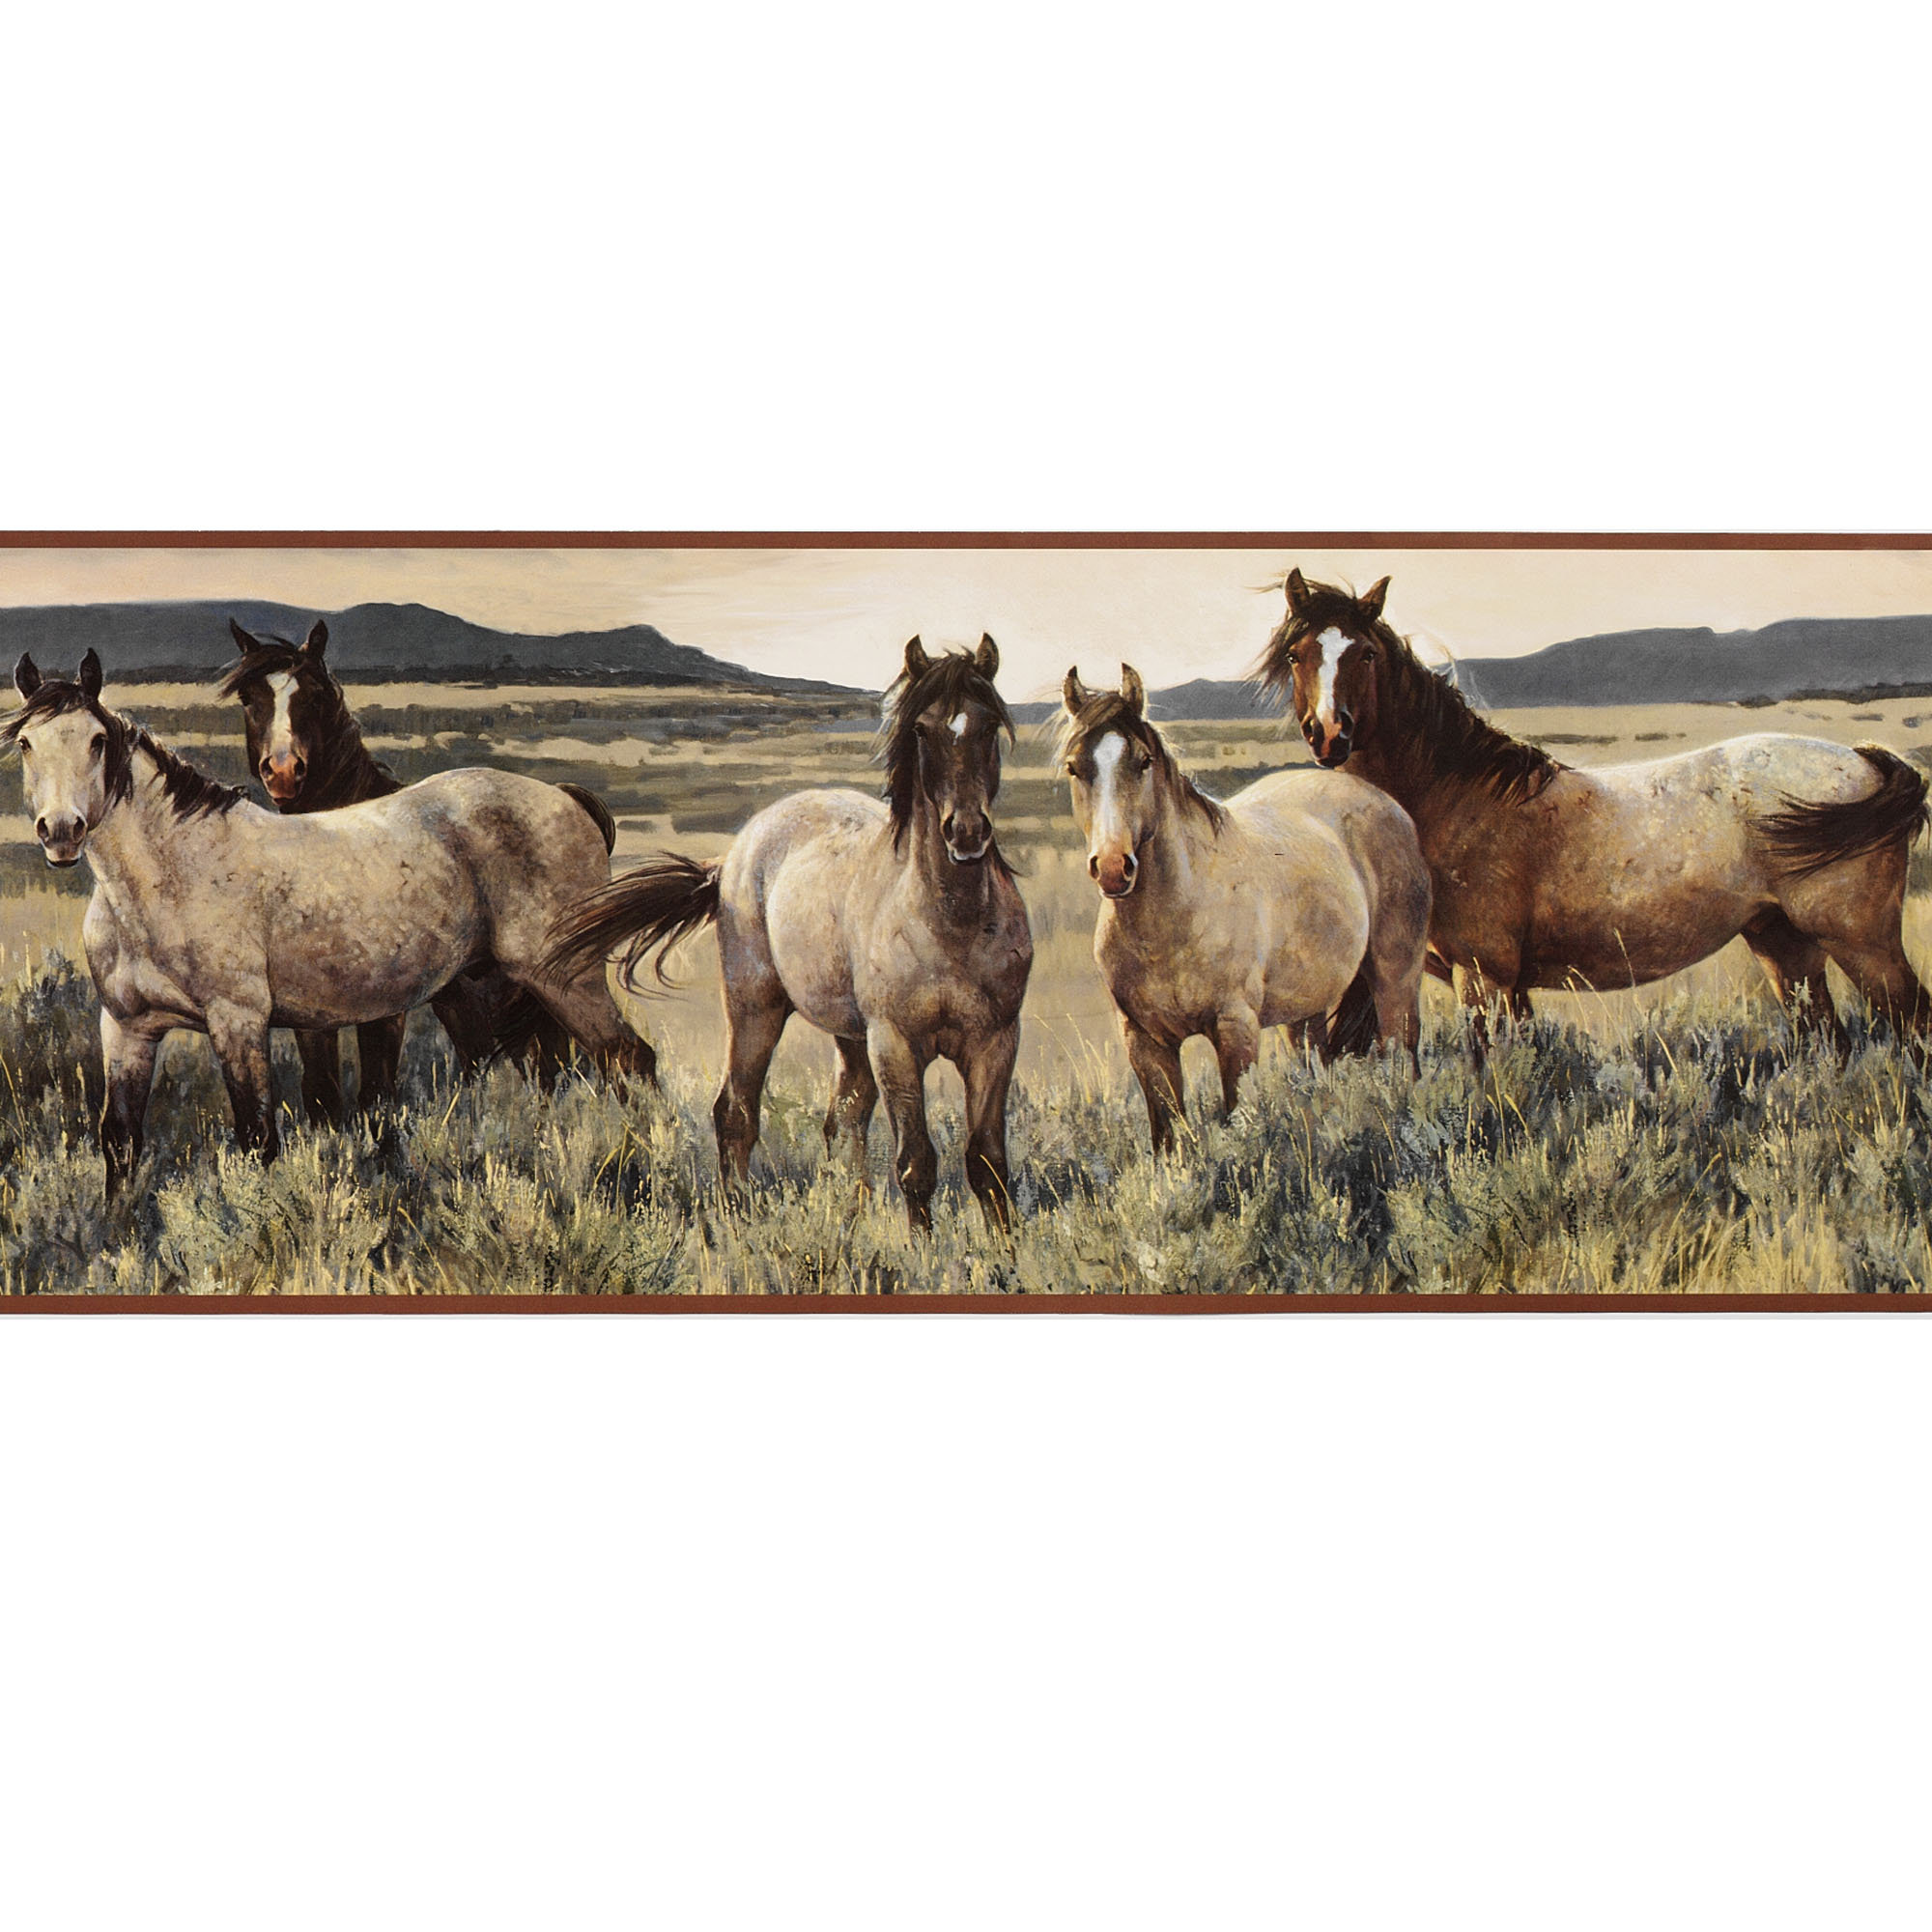 Horses at Fence Wallpaper Border BH1802b CLEARANCE QUANTITIES LIMITED